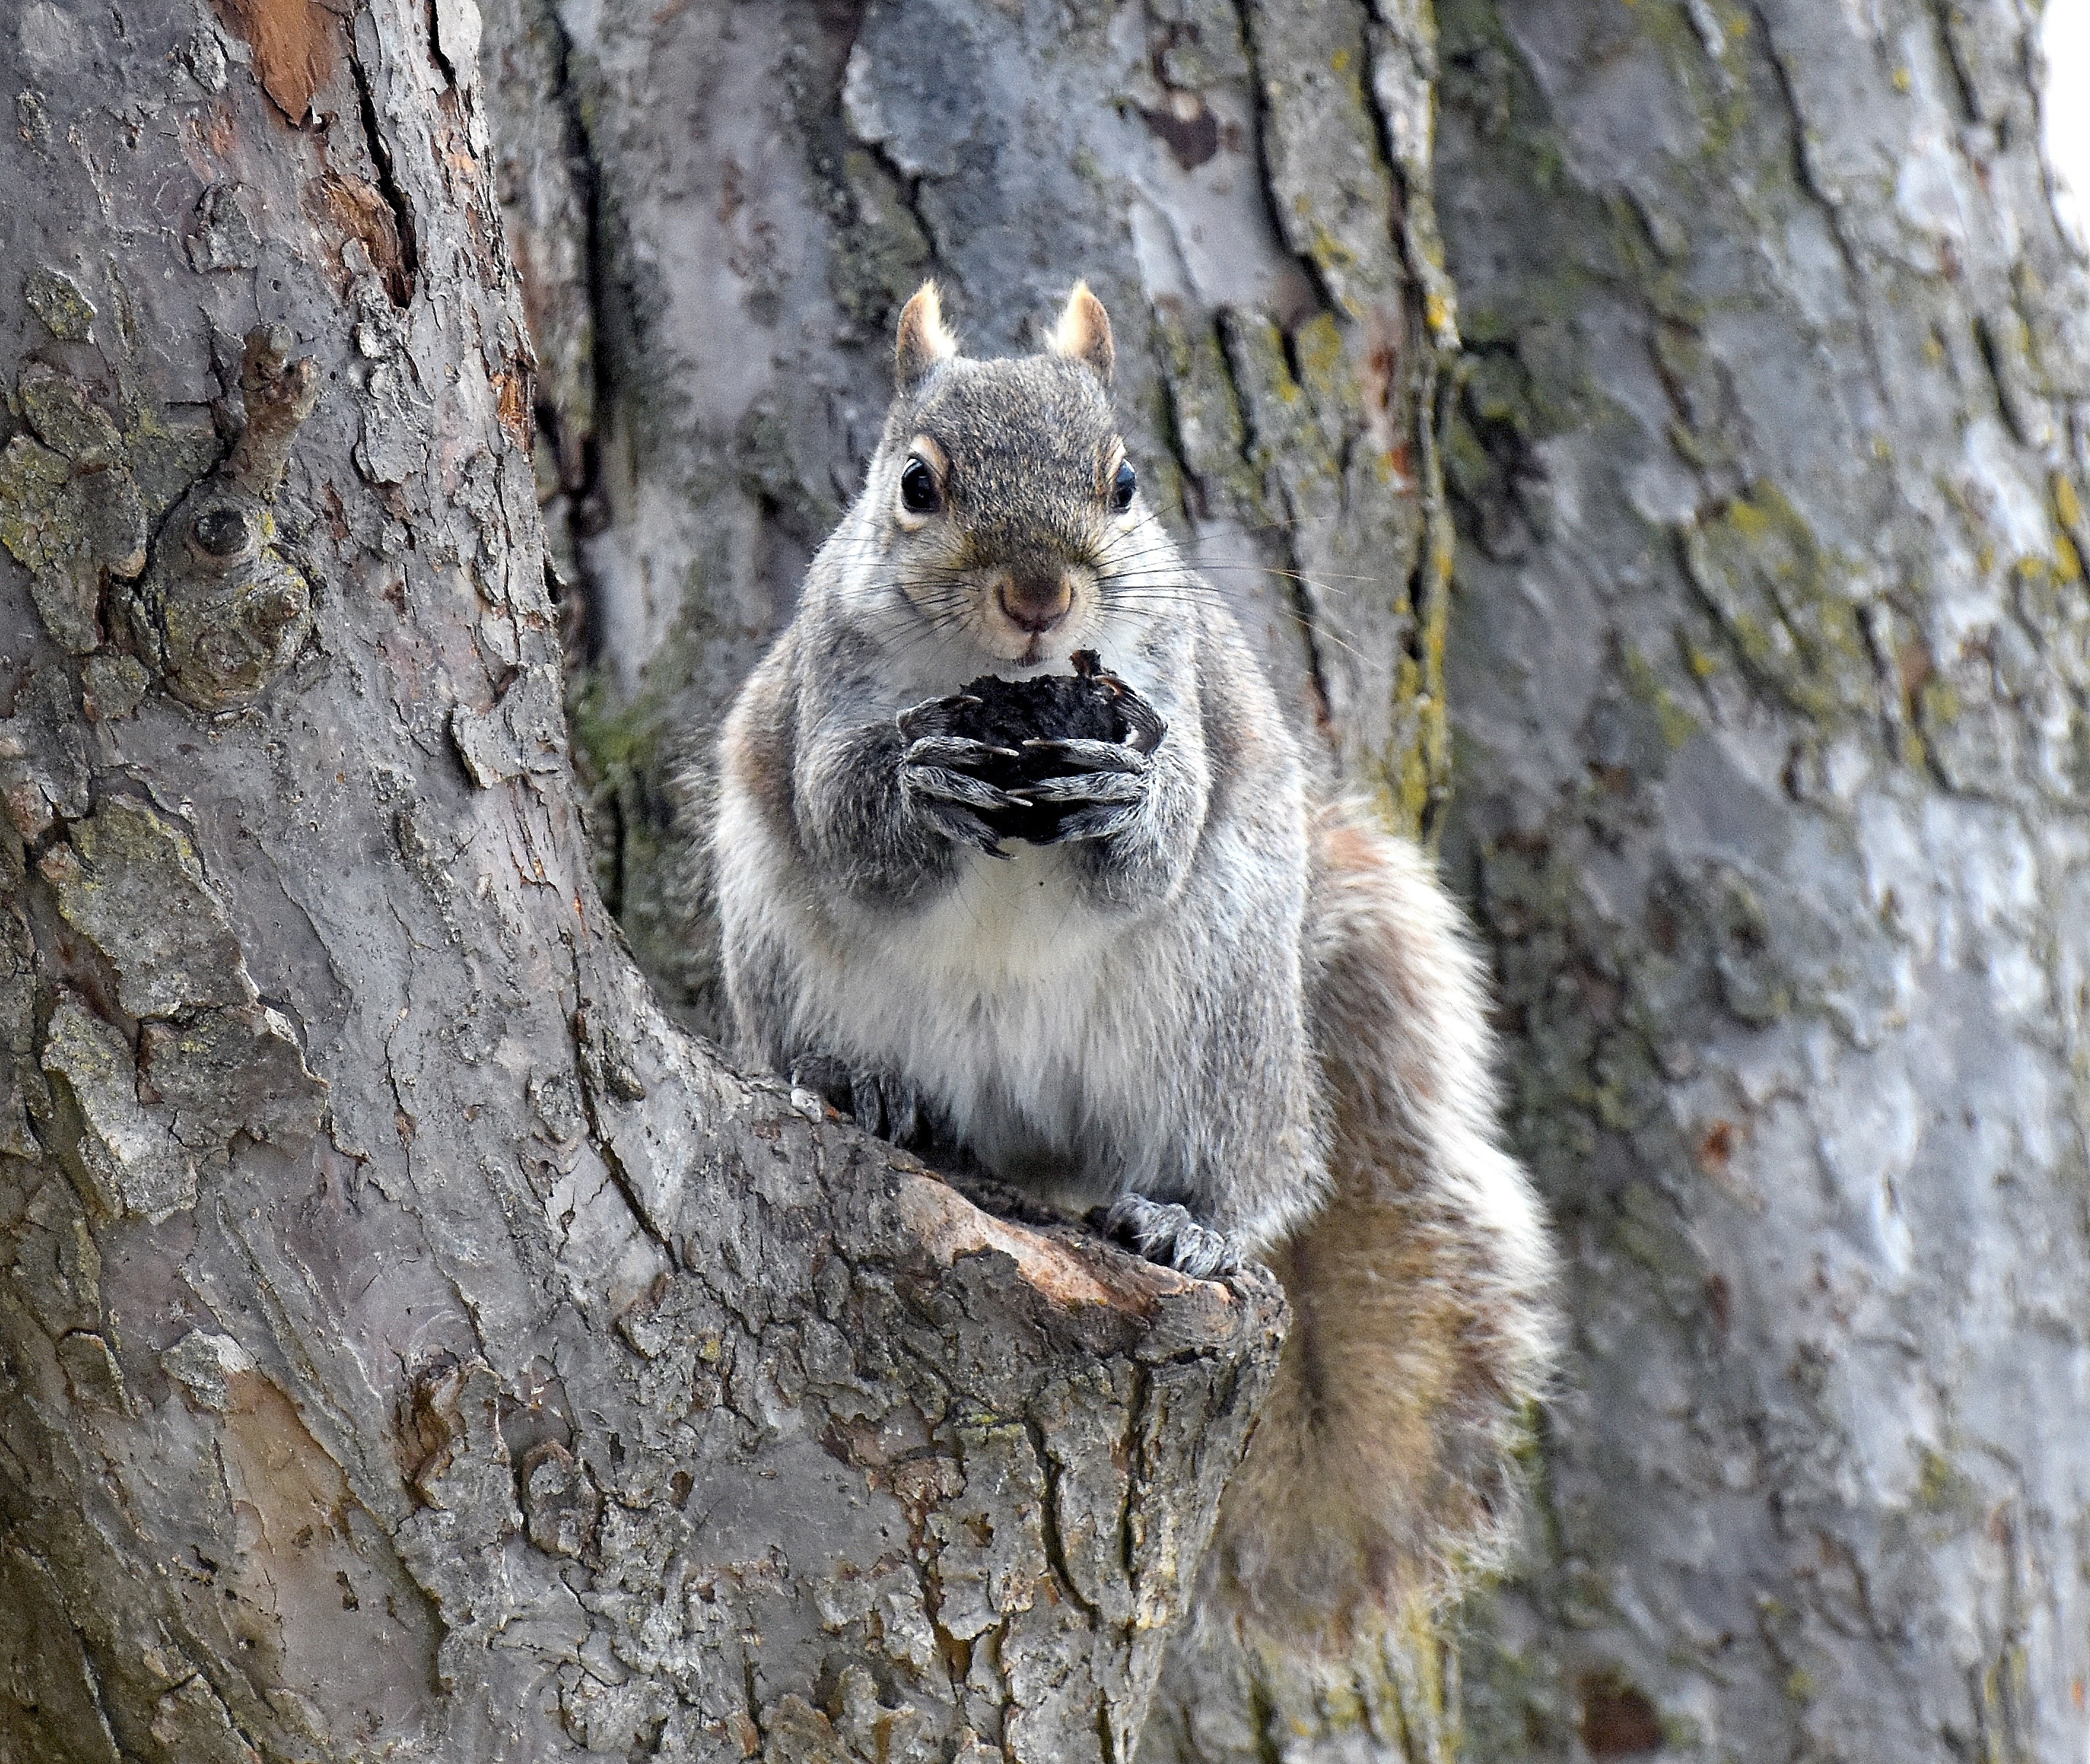 squirrely squirrel | image tagged in squirrel,kewlew | made w/ Imgflip meme maker